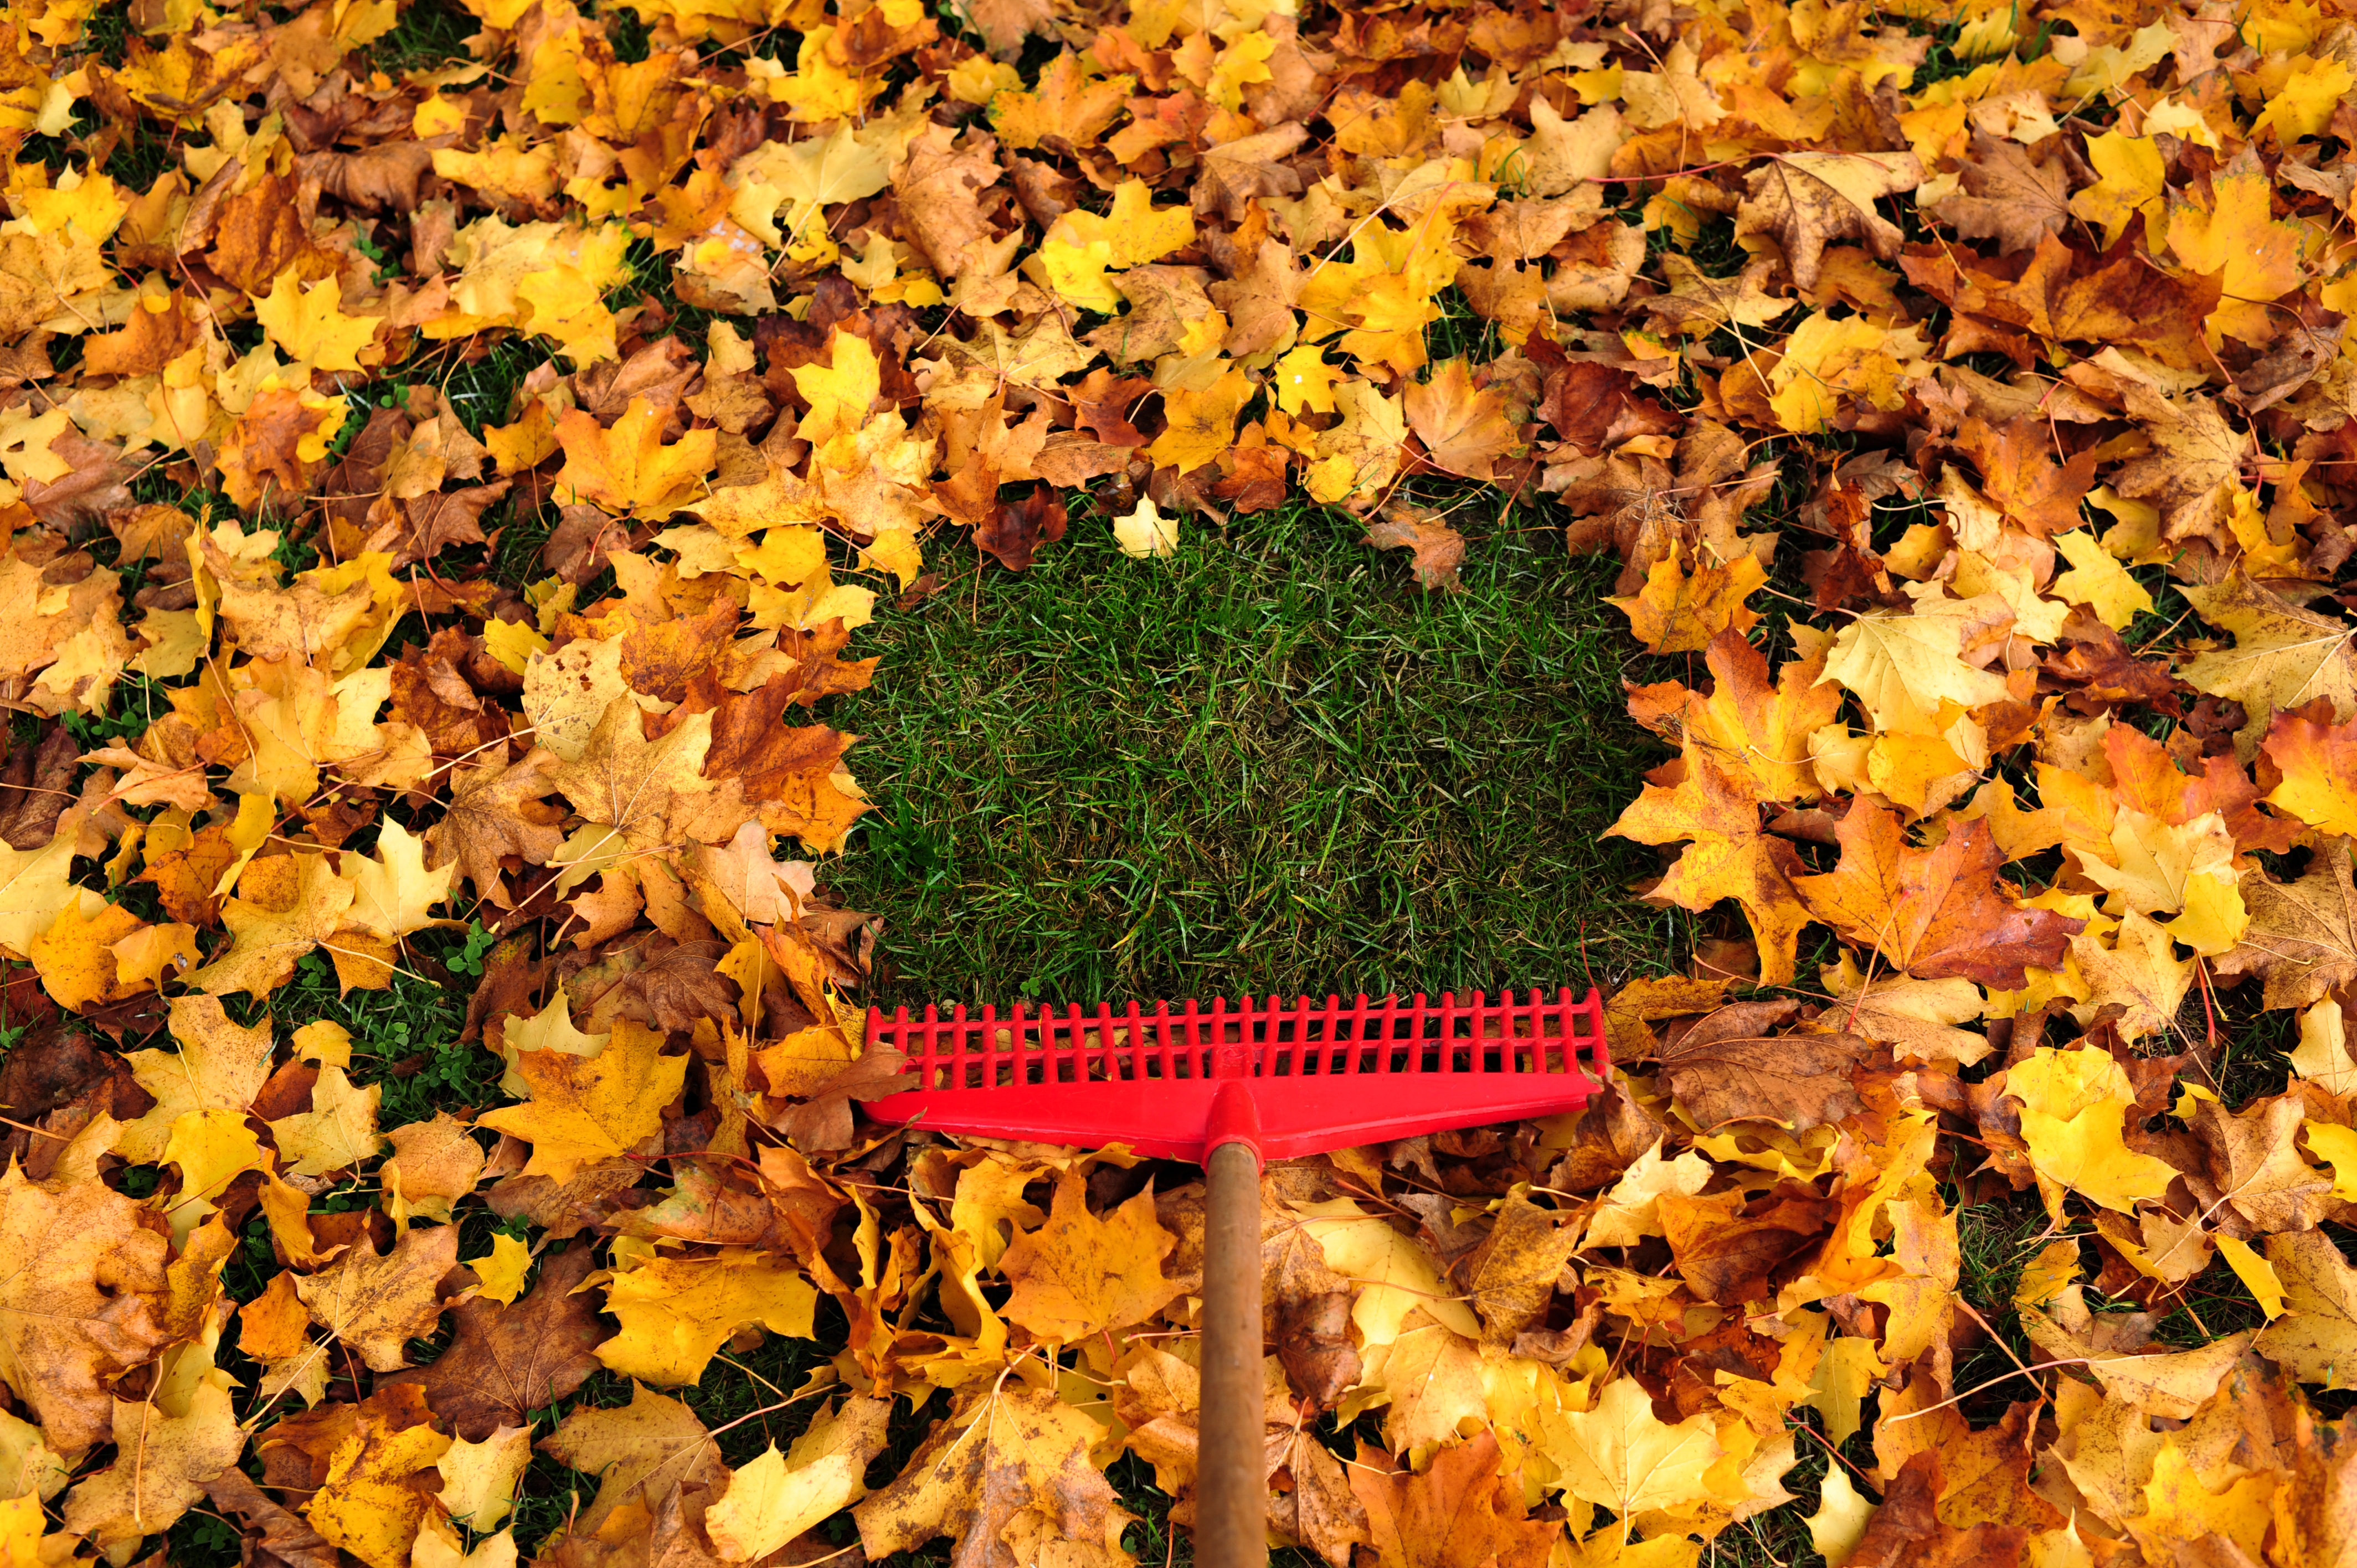 When it comes to fall lawn care, fallen leaves should be raked up as soon as possible.